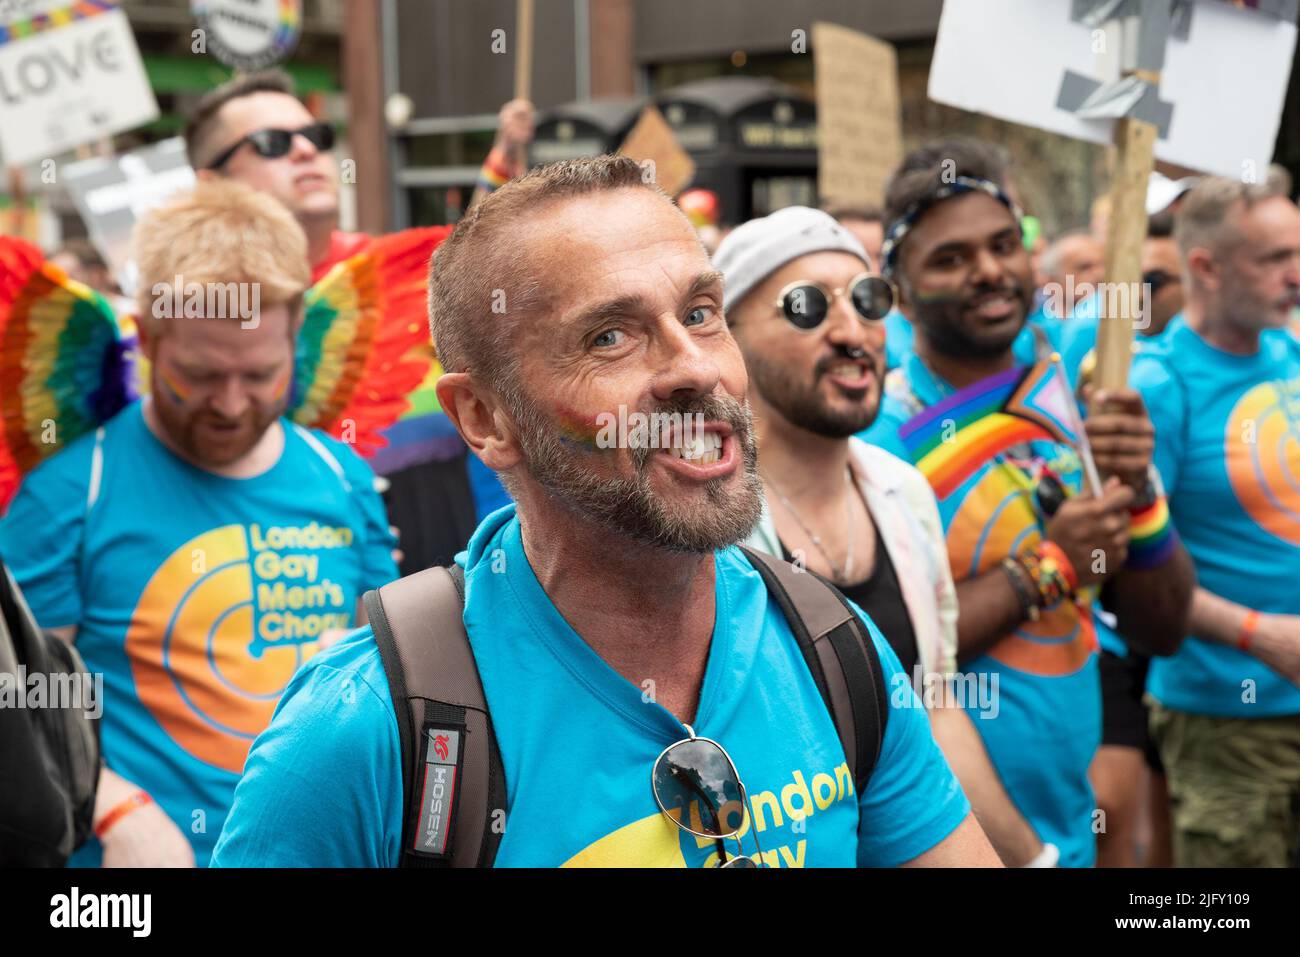 Piccadilly, London, UK. 2nd July 2022. London Pride March 2022. Celebrating 50 Years of Pride in the UK and following the same central London route taken in 1972. London Gay Mens Choir marching and singing. Credit: Stephen Bell/Alamy Stock Photo